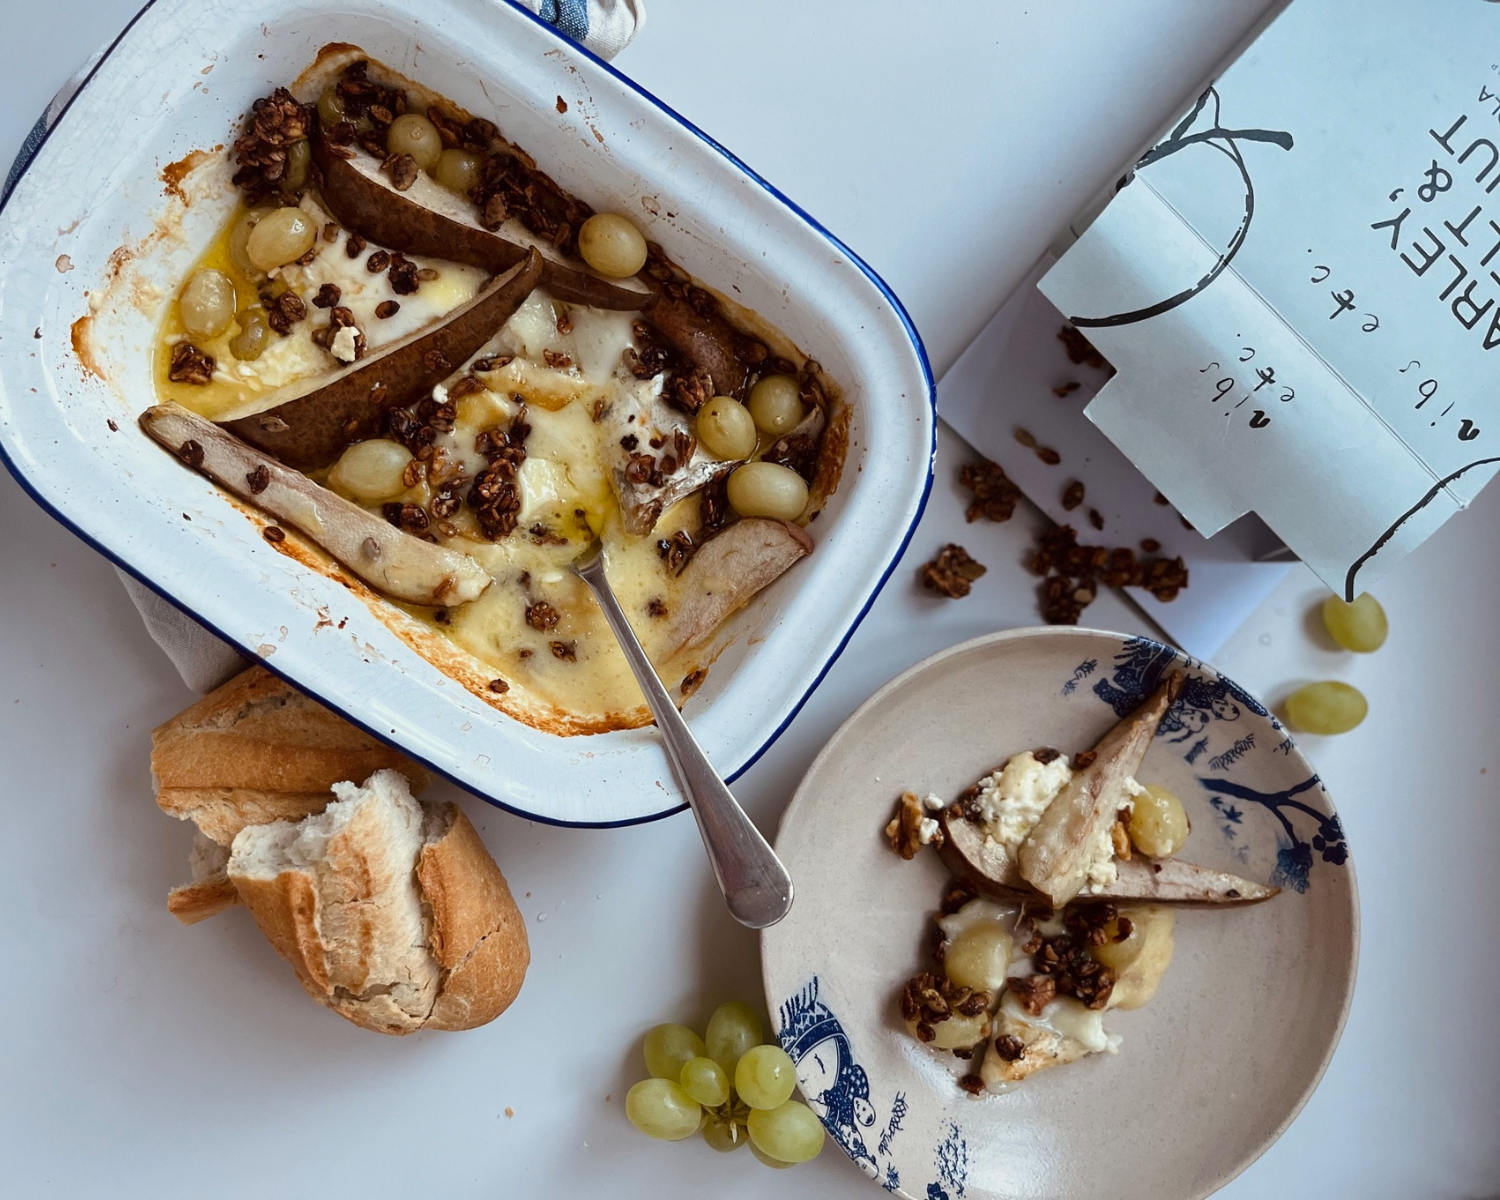 Recipe etc.: Baked Cheeseboard with Pear & Grapes